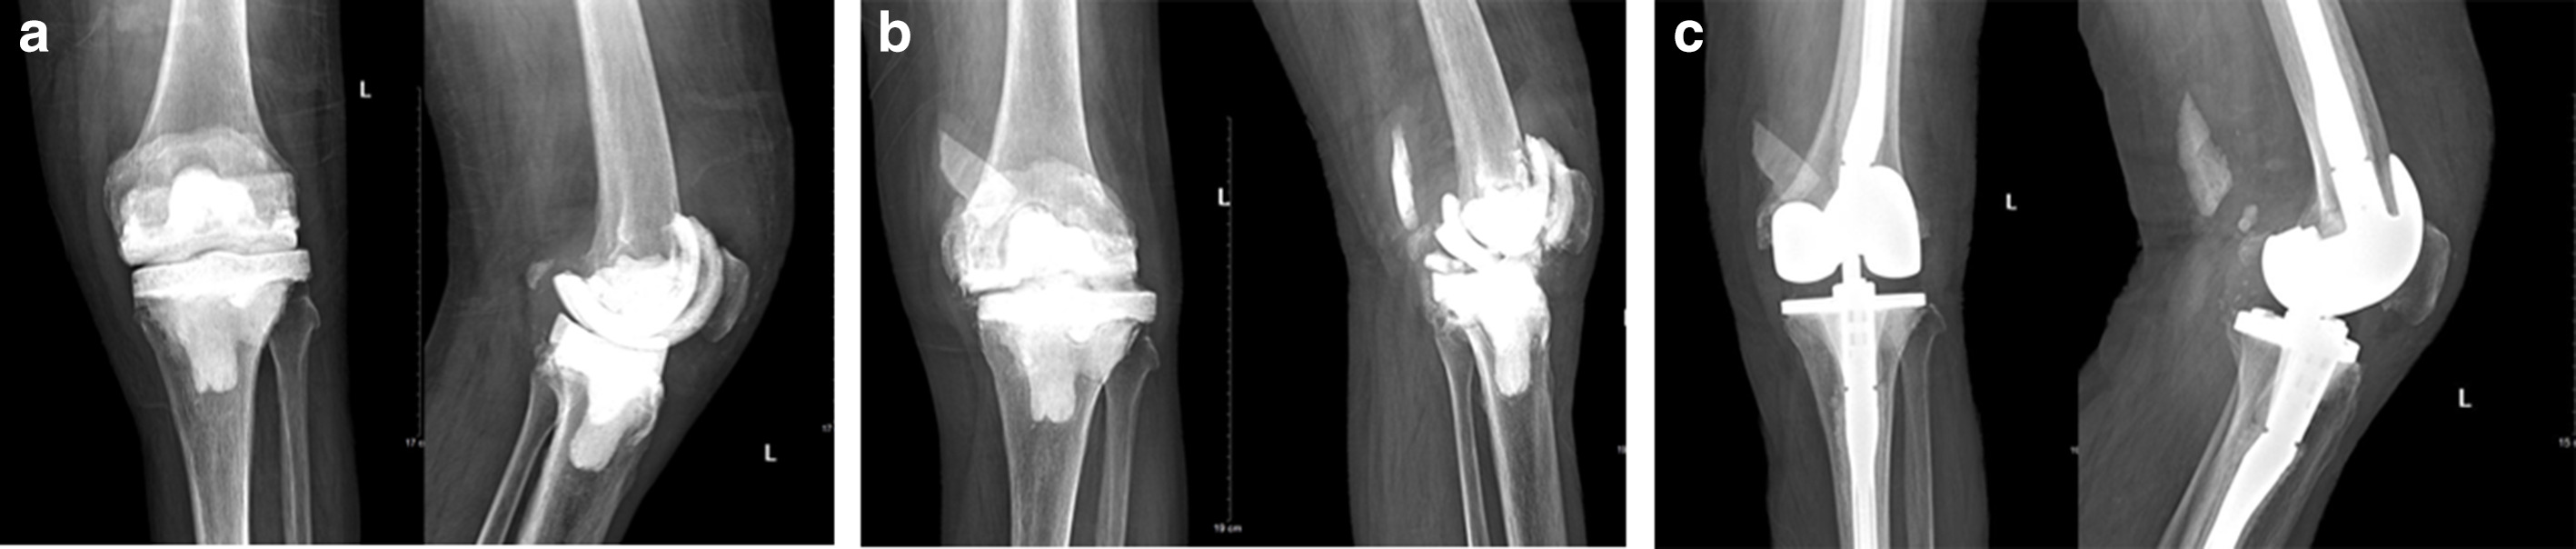 Fig. 3 
          Anteroposterior and lateral radiographs of a patient who underwent reimplantation three years after first-stage revision because of a cement spacer fracture. a) An 82-year-old male patient with a cement spacer one week after the first-stage revision. b) An 85-year-old male patient with a fractured cement spacer three years after the first-stage revision during the follow-up. c) An 85-year-old male patient with revision prostheses one week after reimplantation.
        